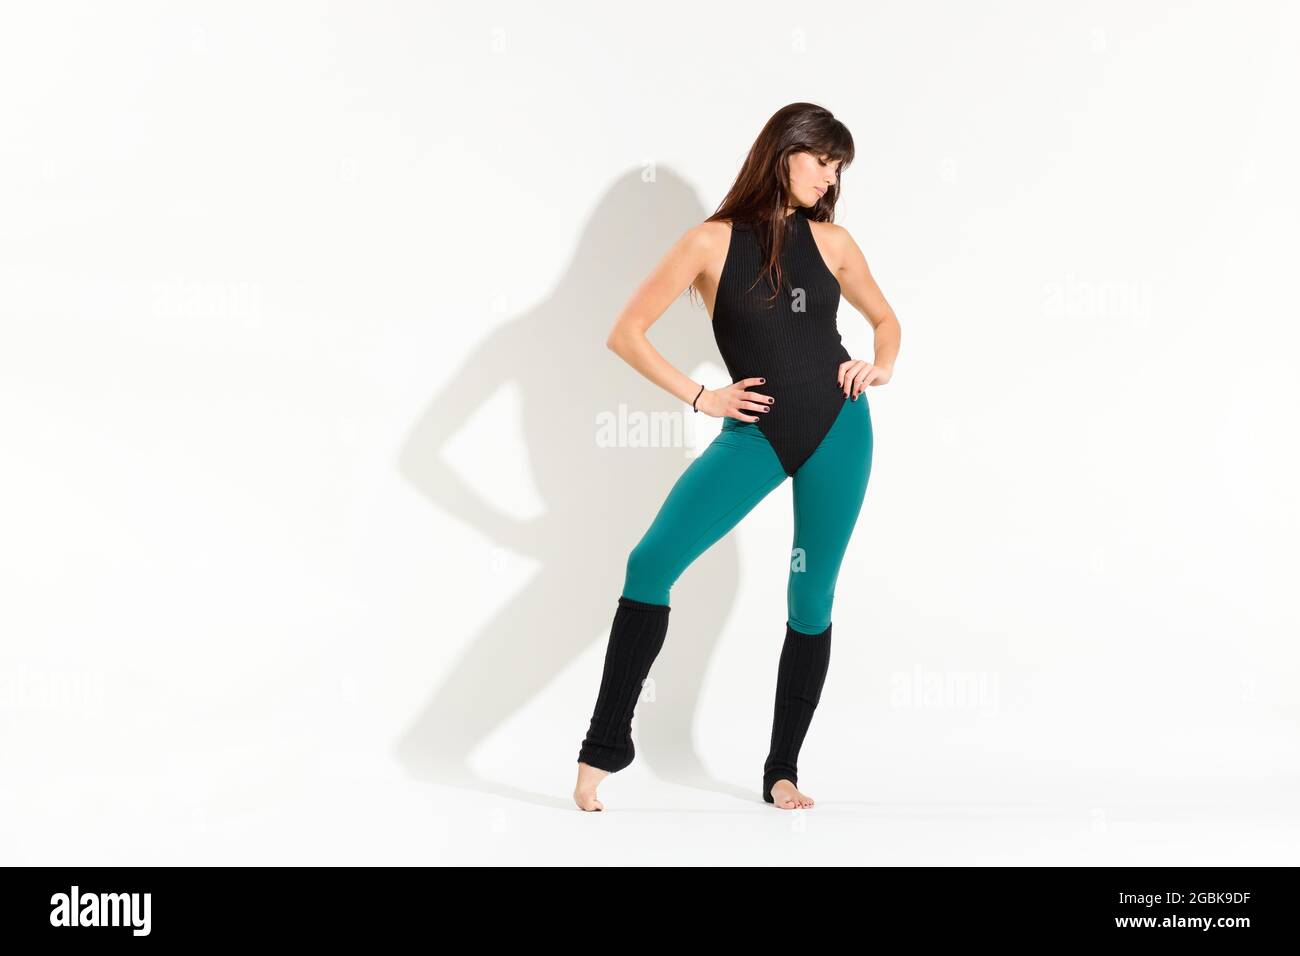 https://c8.alamy.com/comp/2GBK9DF/shapely-young-woman-wearing-an-80s-dance-outfit-with-leotard-over-tights-and-leg-warmers-posing-over-a-white-background-with-shadow-and-copyspace-2GBK9DF.jpg